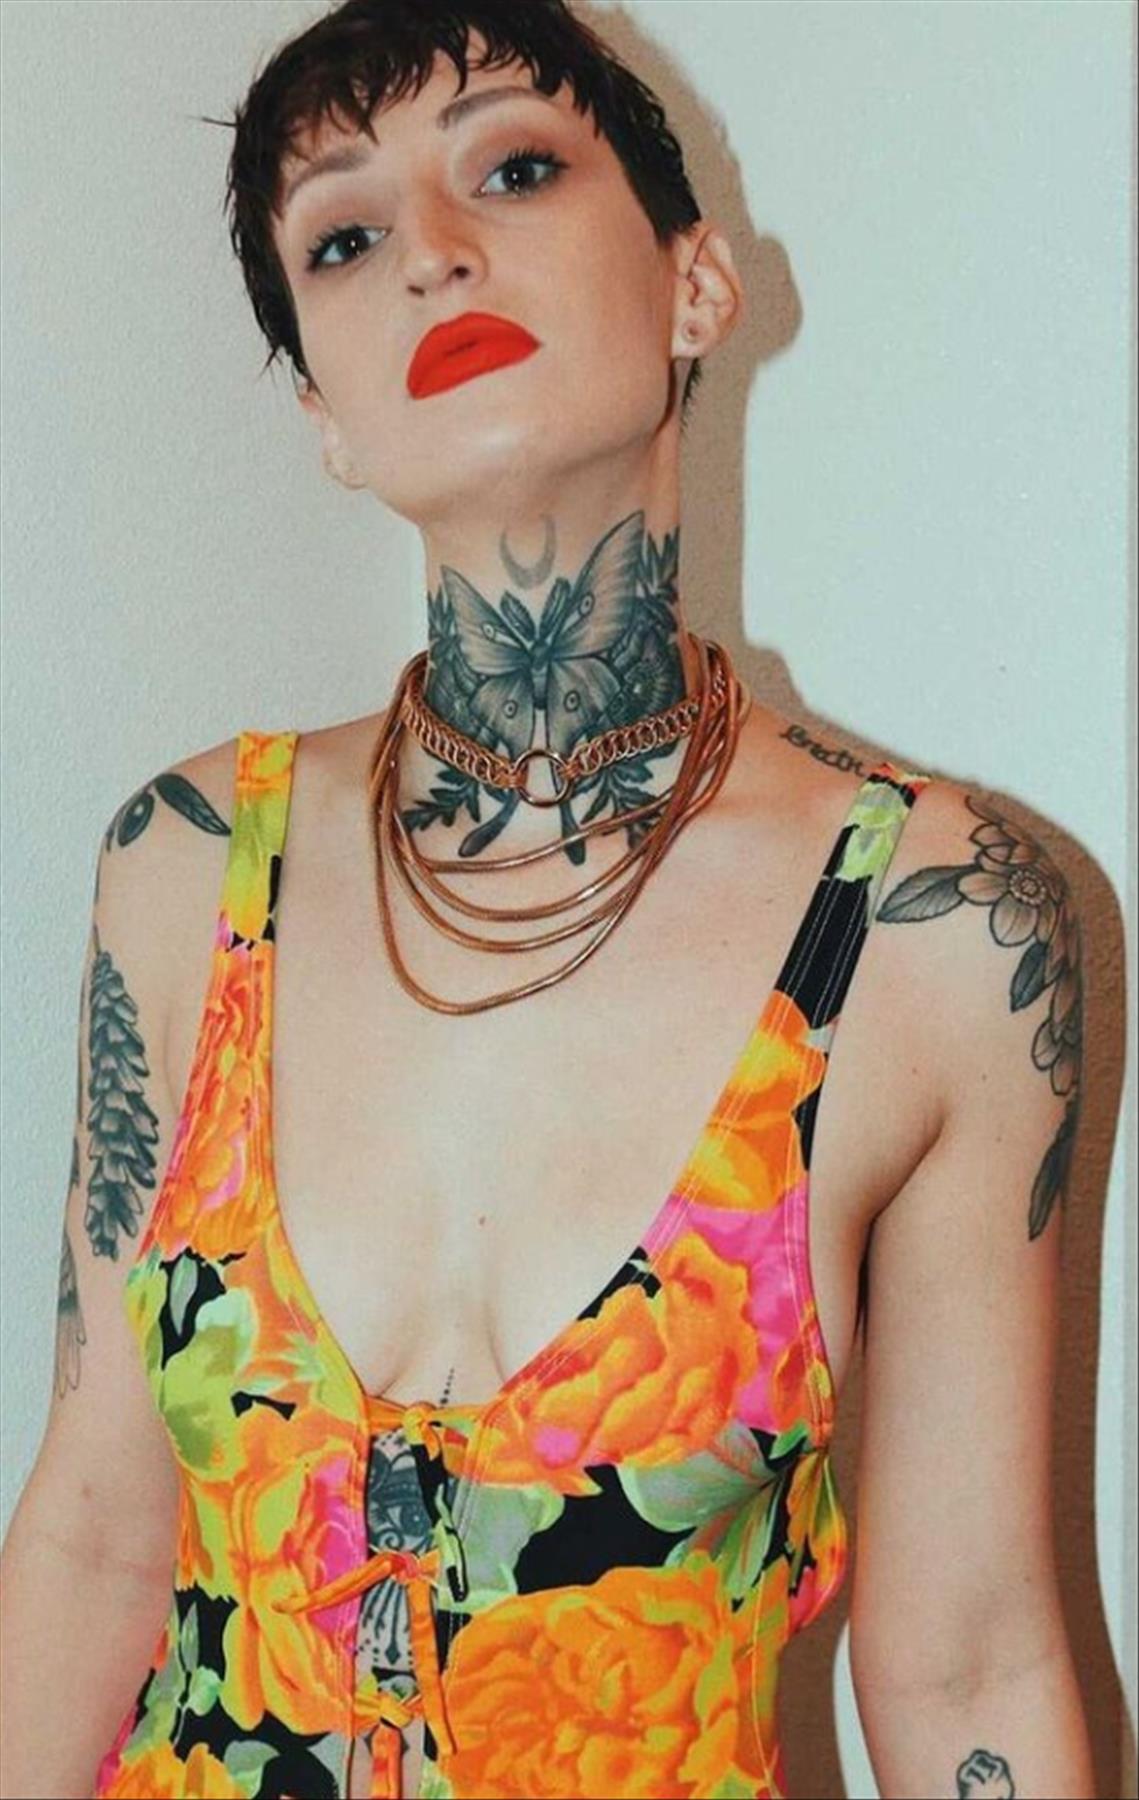 Neck Tattoo for women: Cool tattoo placement to try